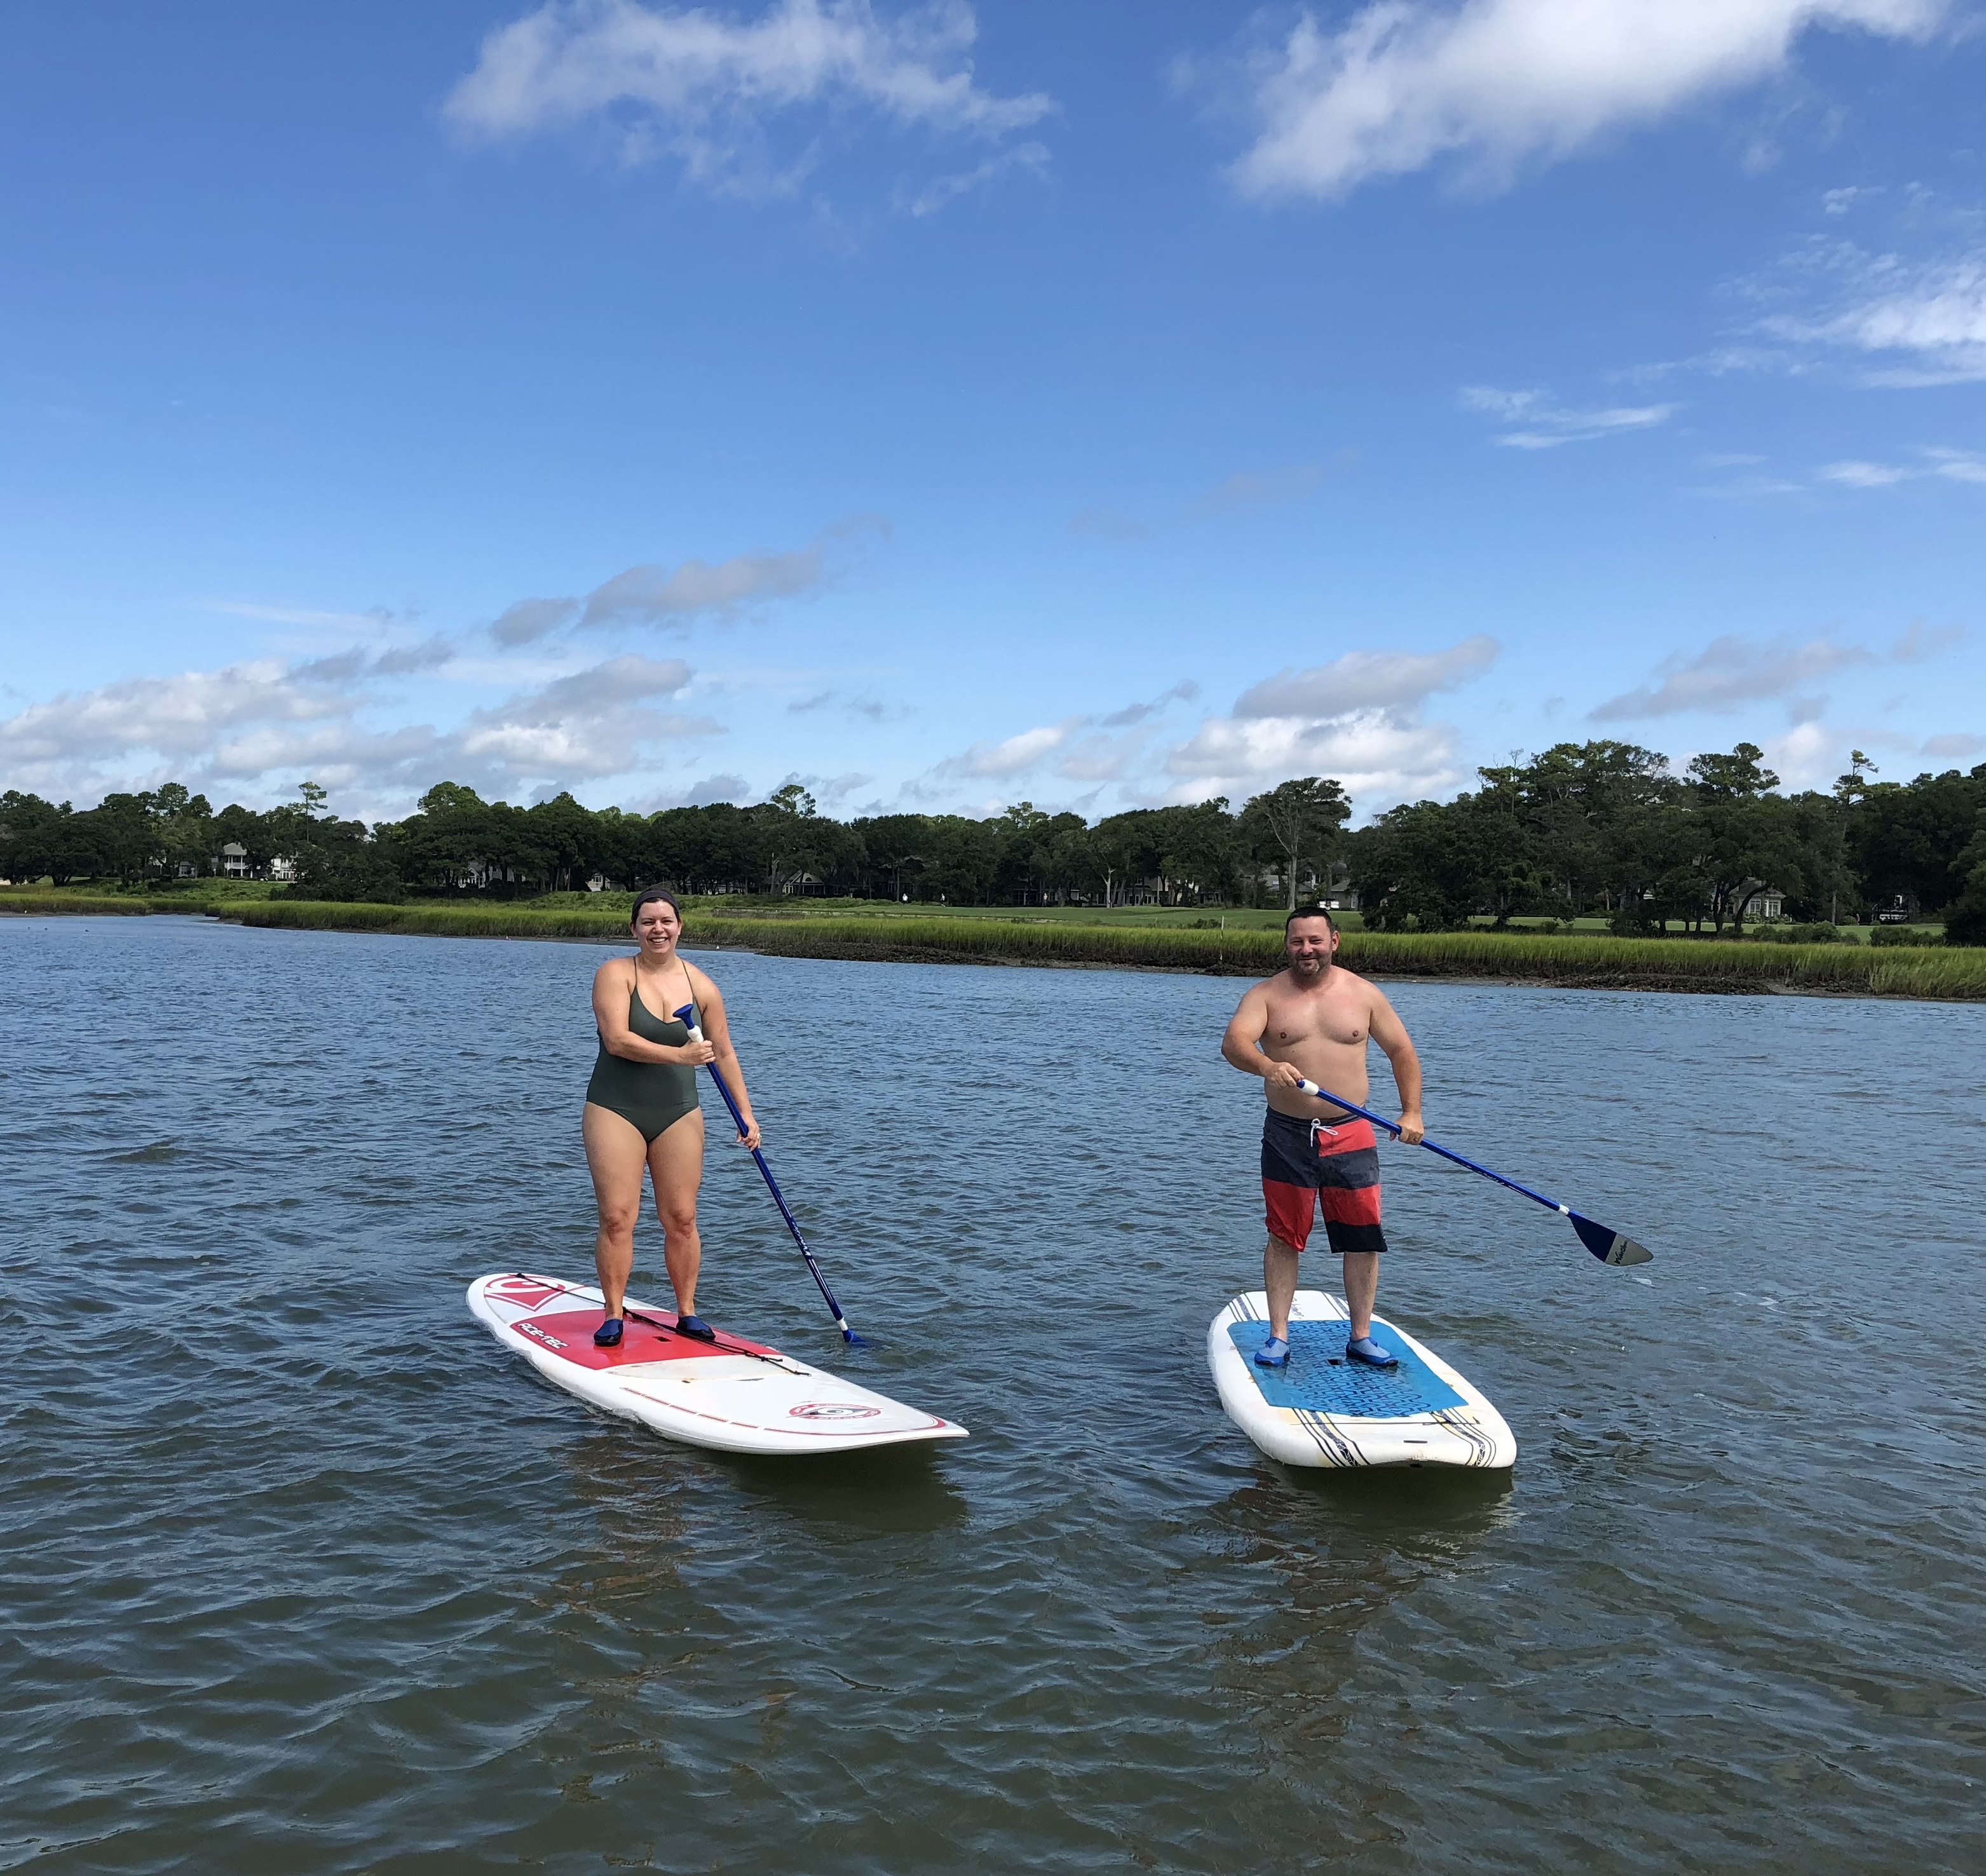 Paddle boarding on the waterway at the beach.